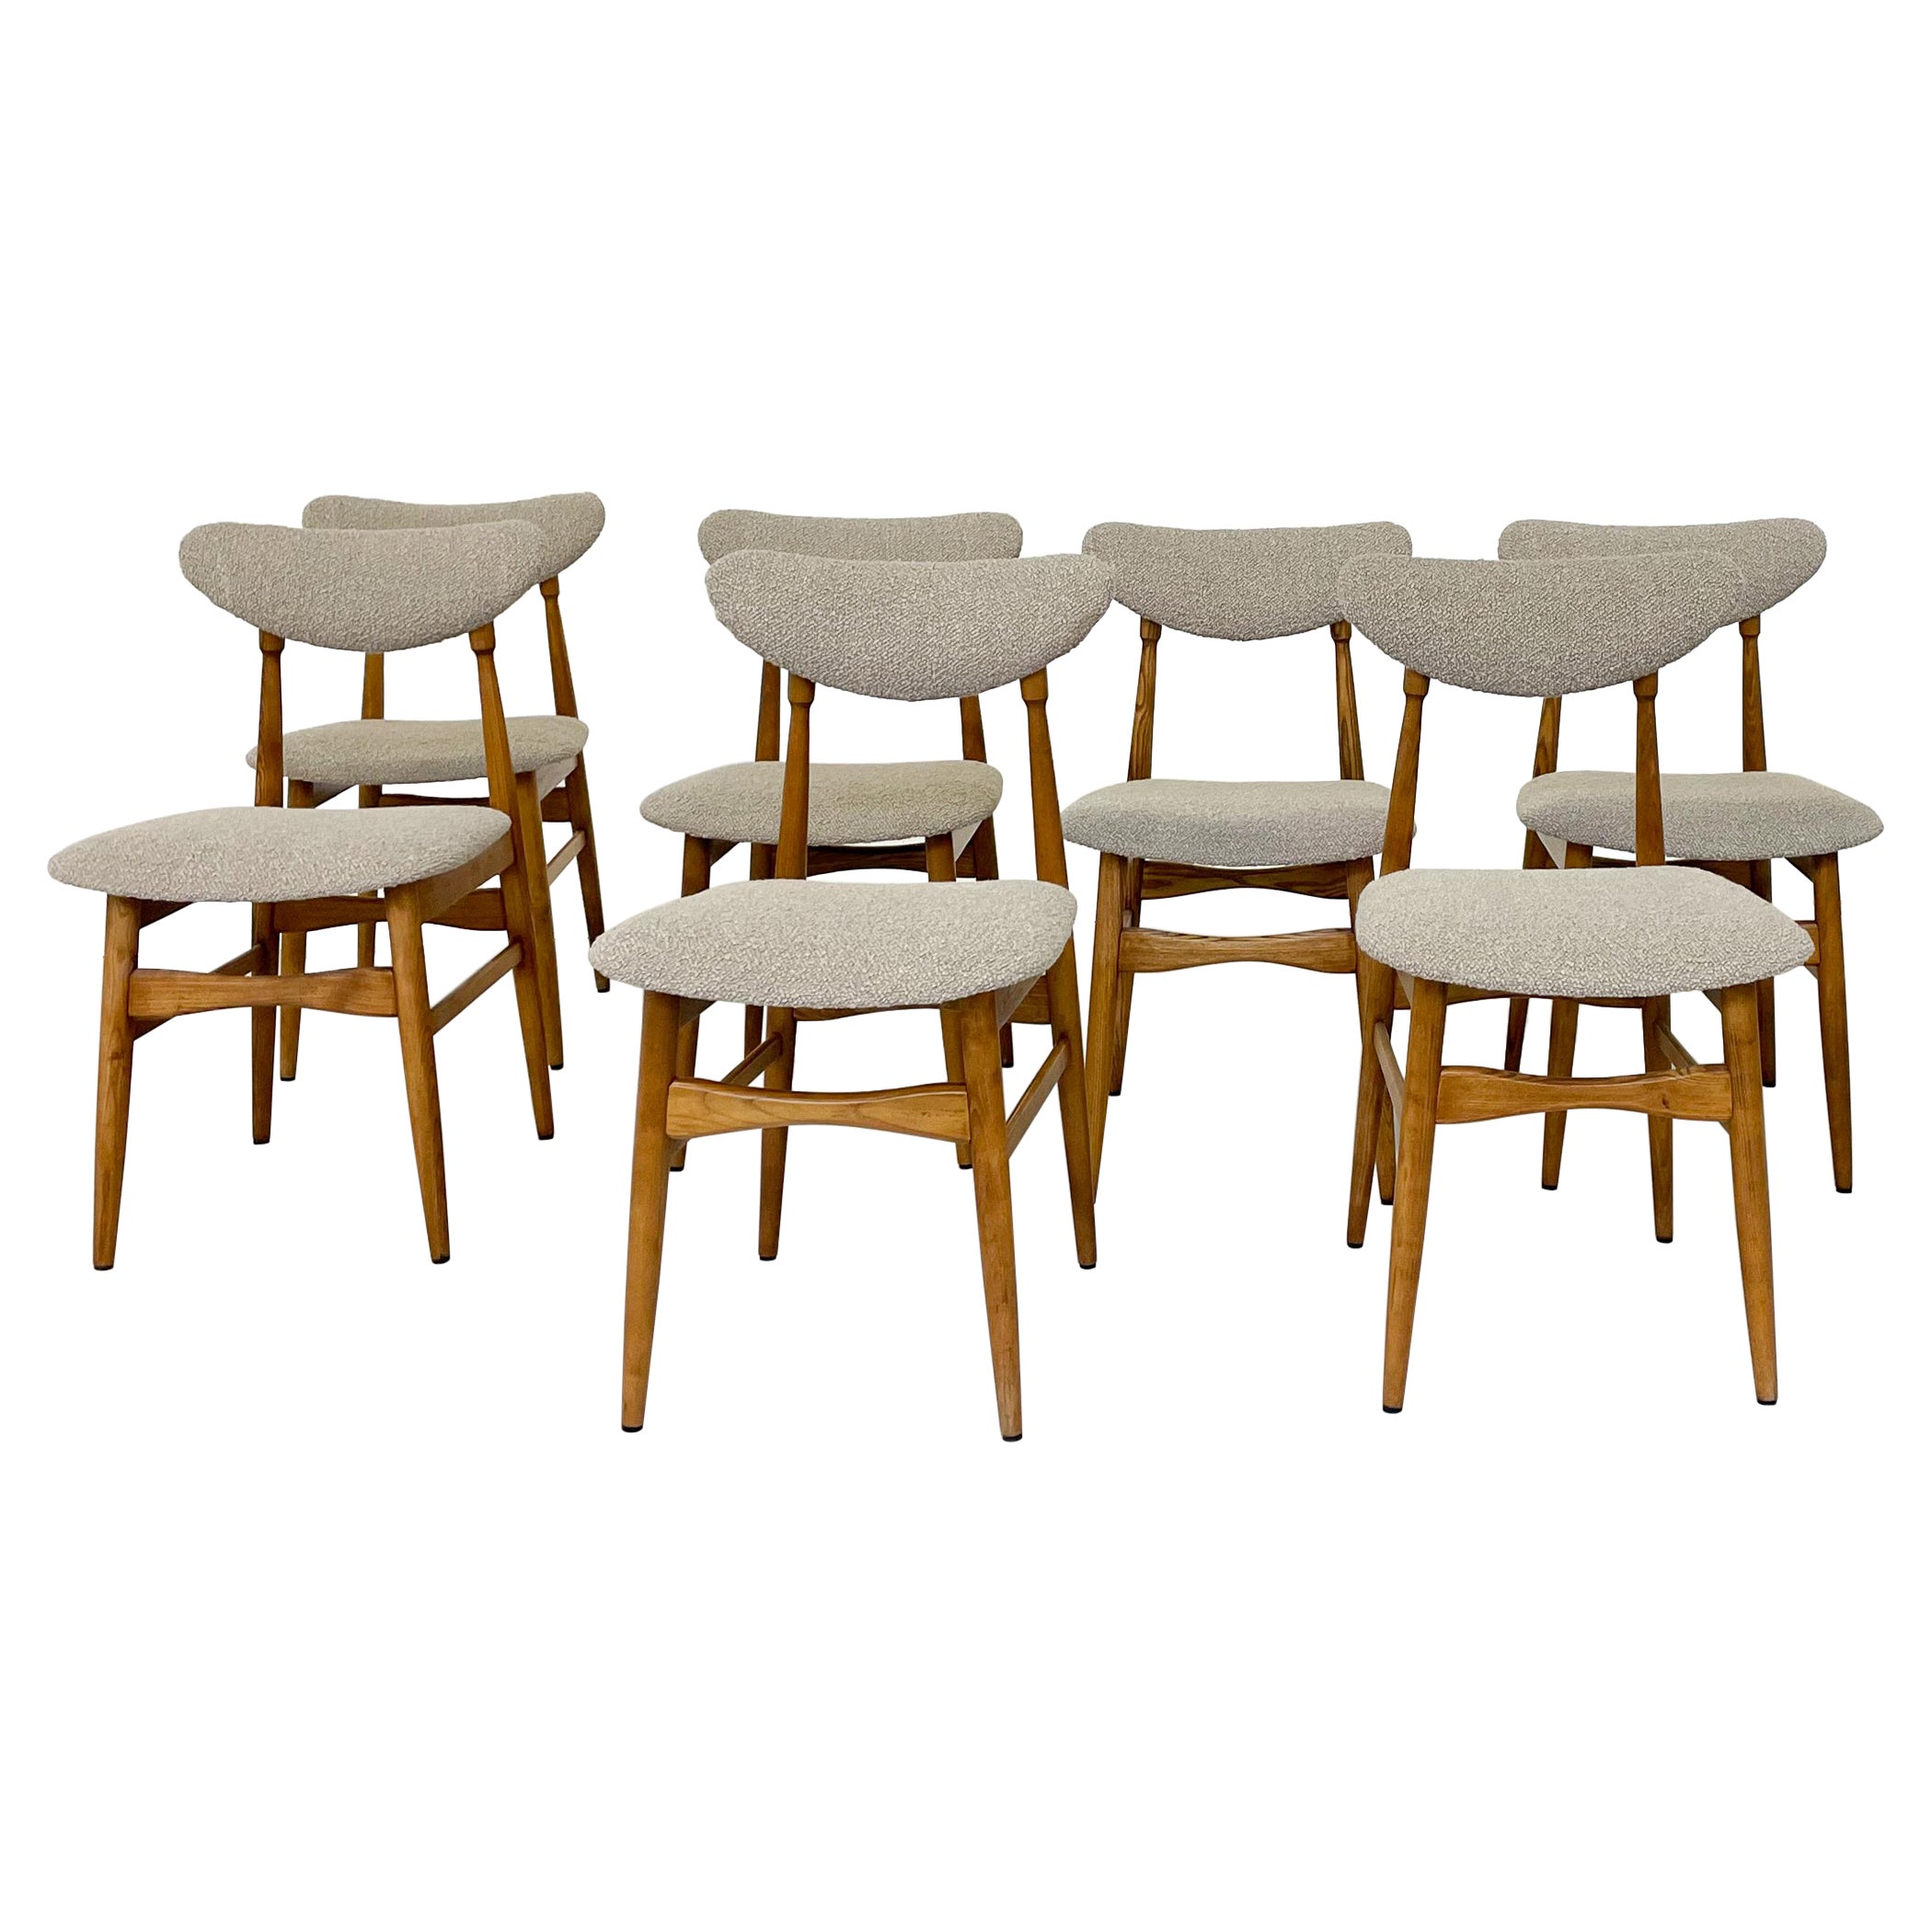 Mid-Century Modern Set of 12 Chairs, Italy, 1960s - New Upholstery